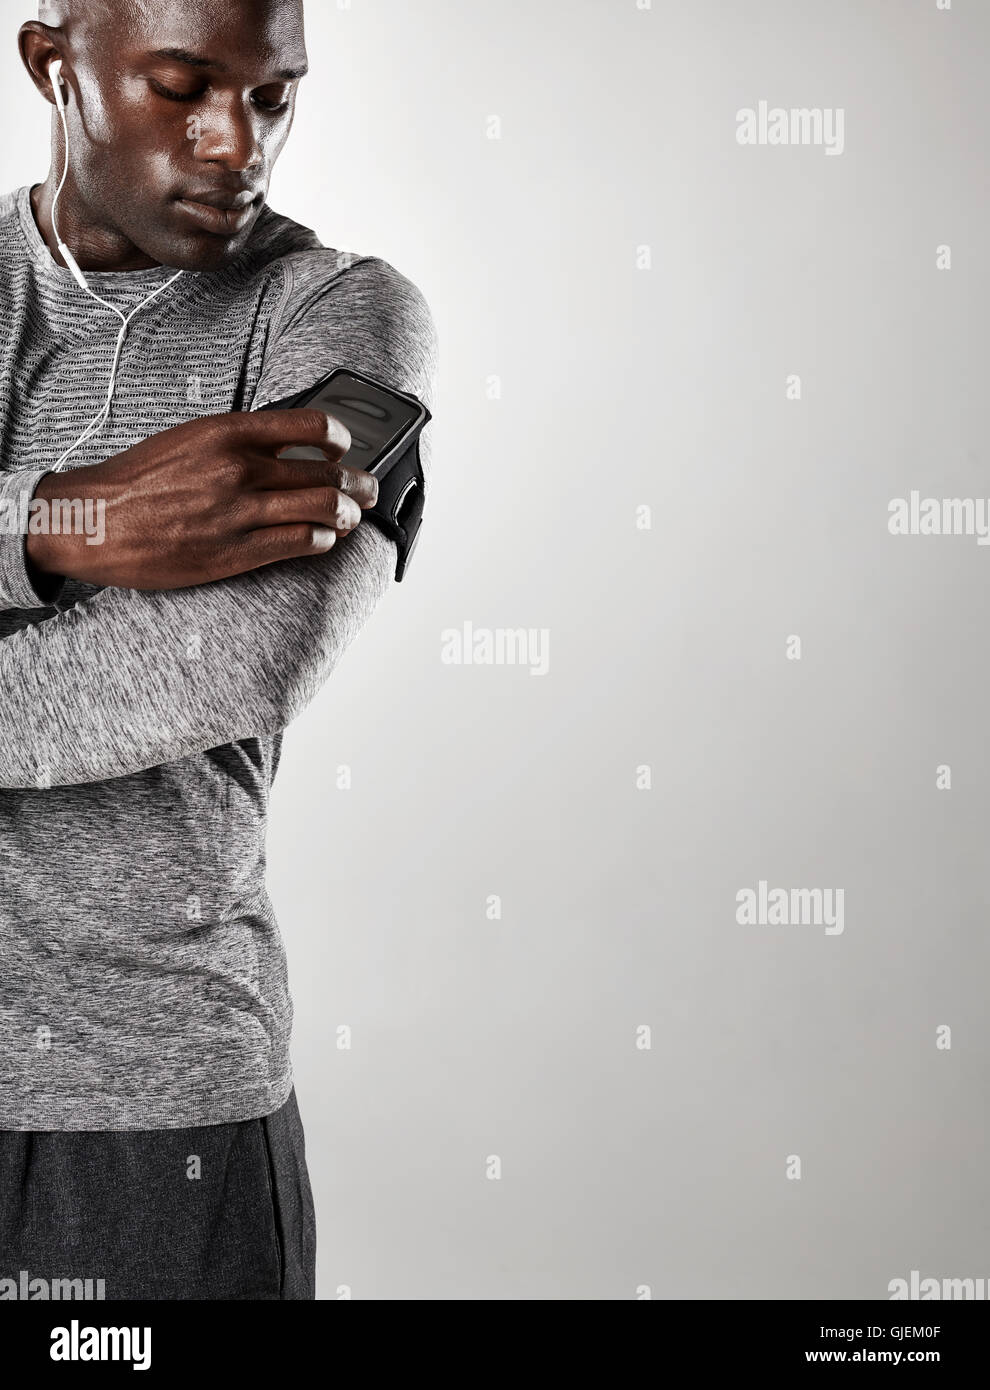 Shot of young black male model listening to music on cell phone. Man with mobile phone armband standing against grey background Stock Photo